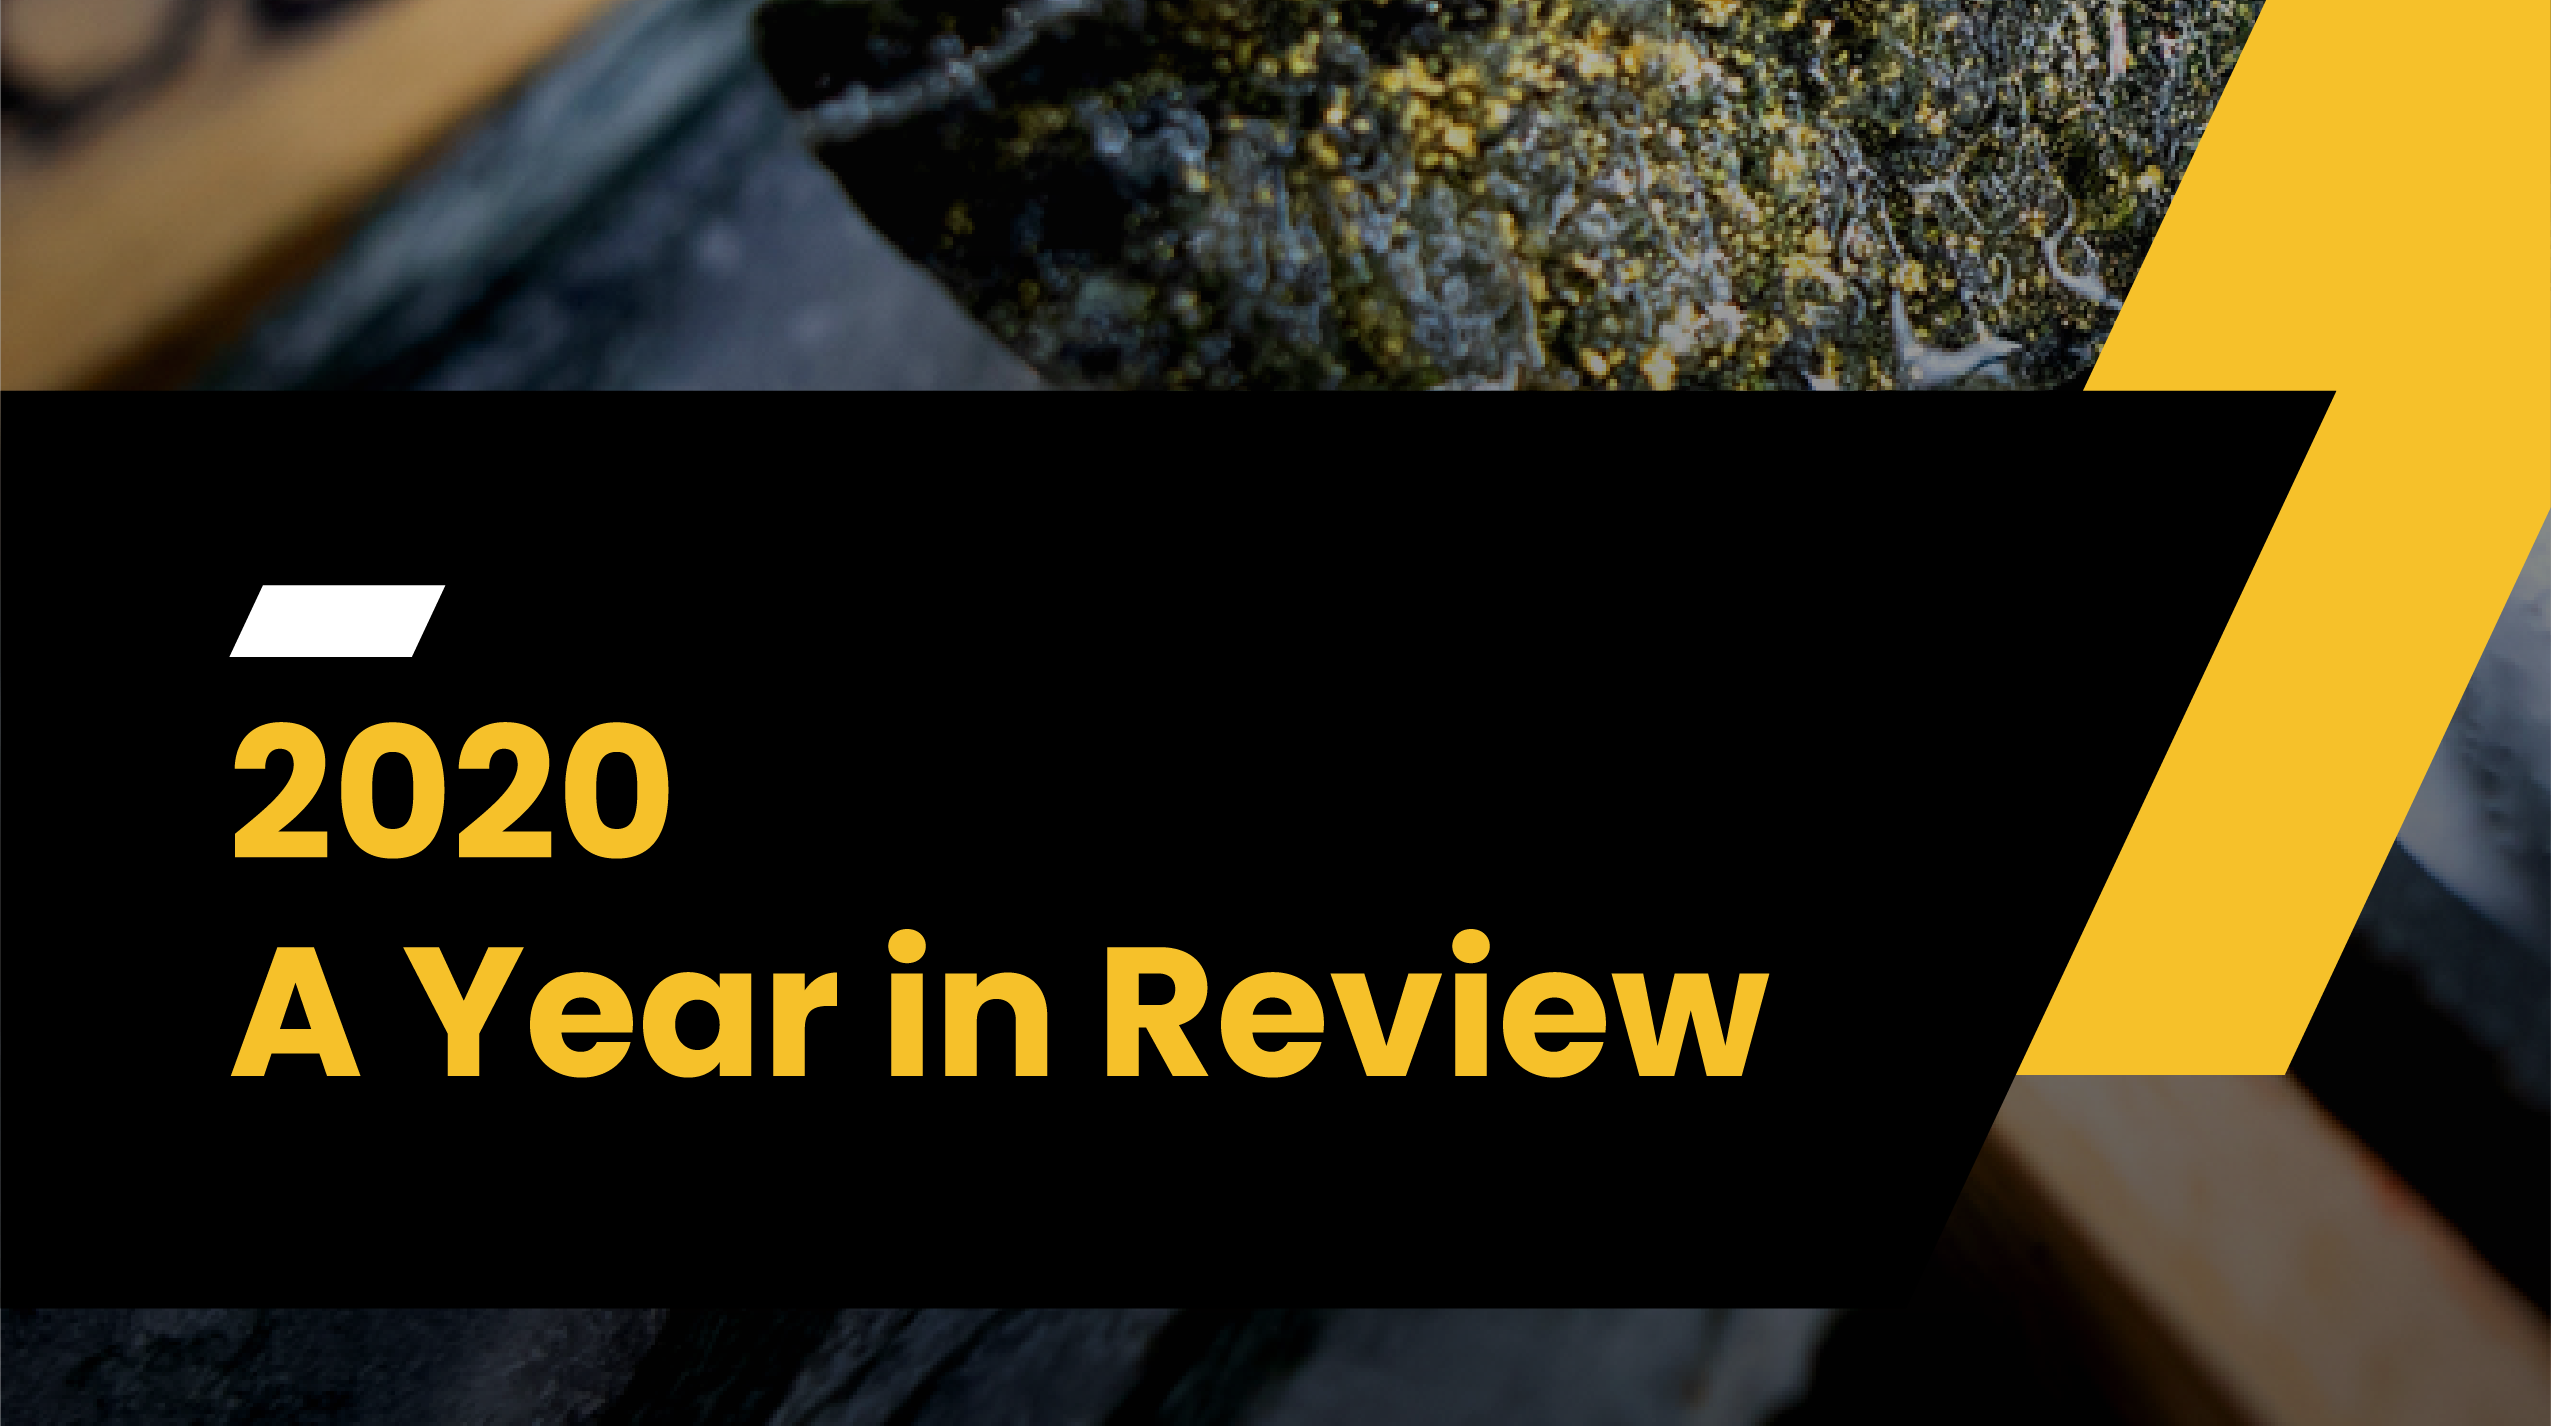 2020 – A Year in Review